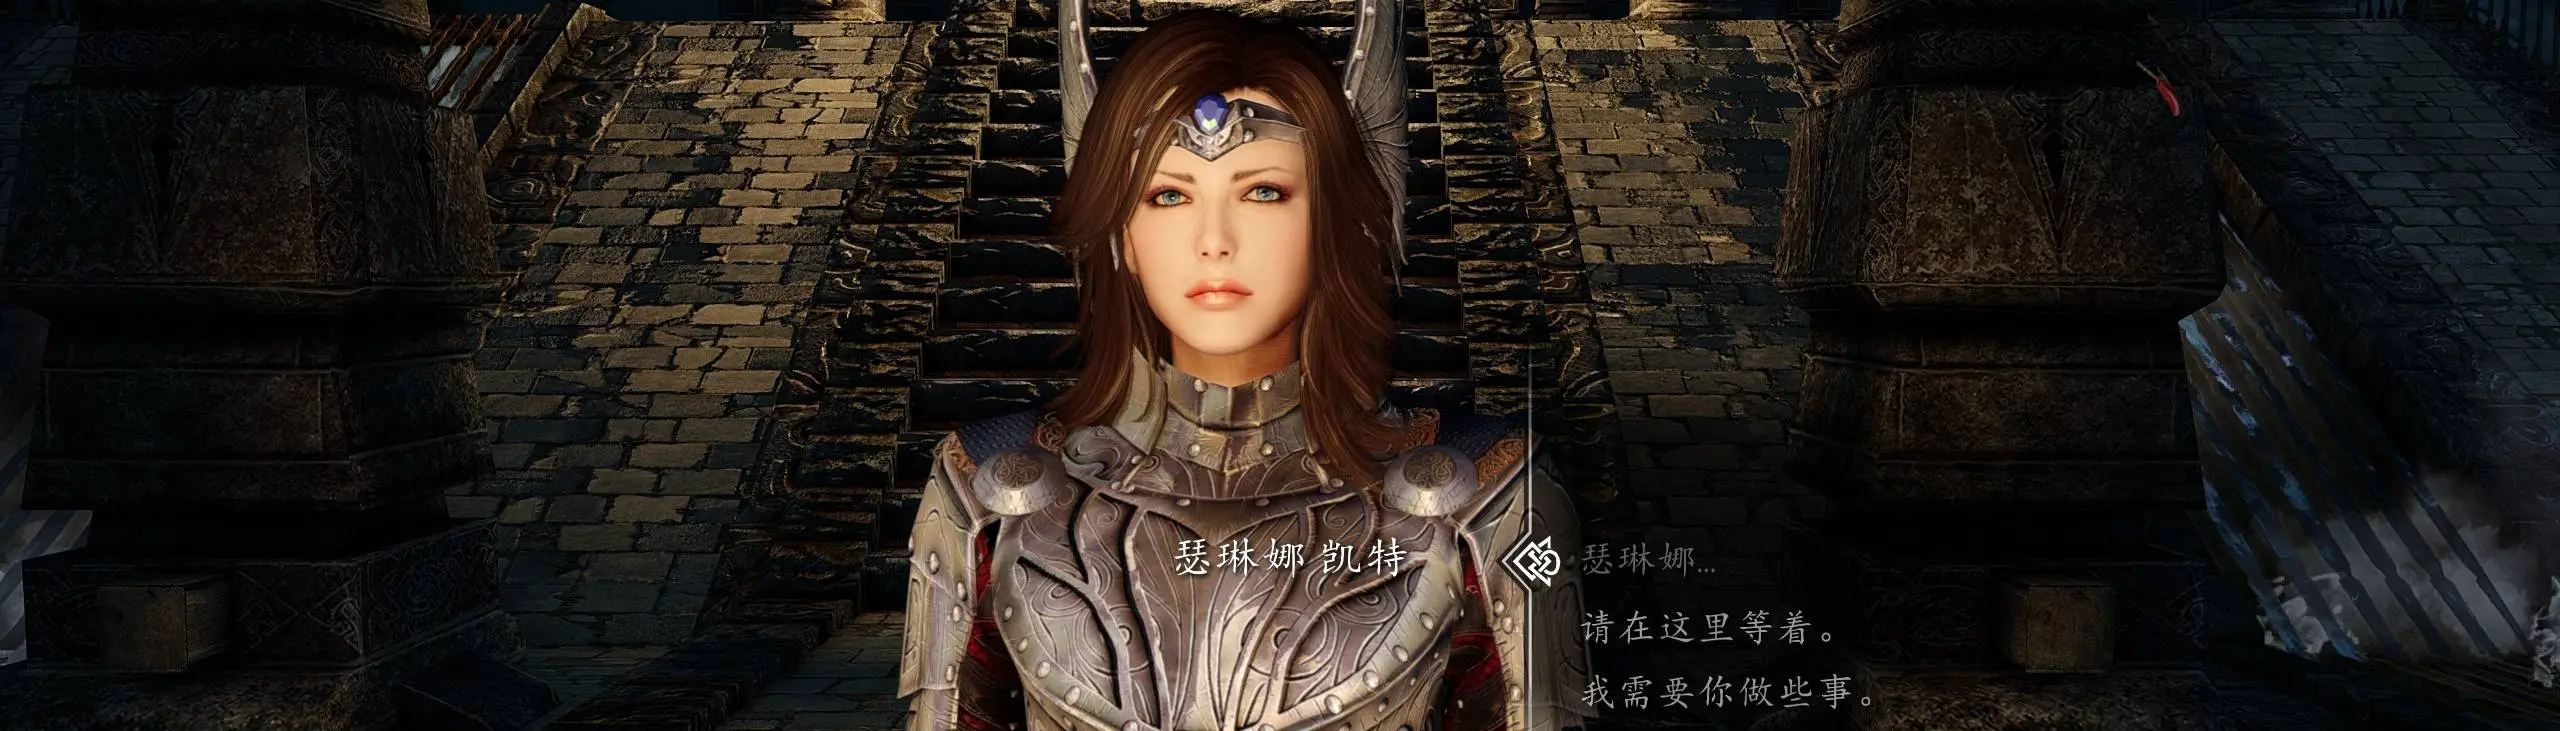 Selene Kate Follower Or Serana Replacer Sse Mcm Simplechinese At Skyrim Special Edition